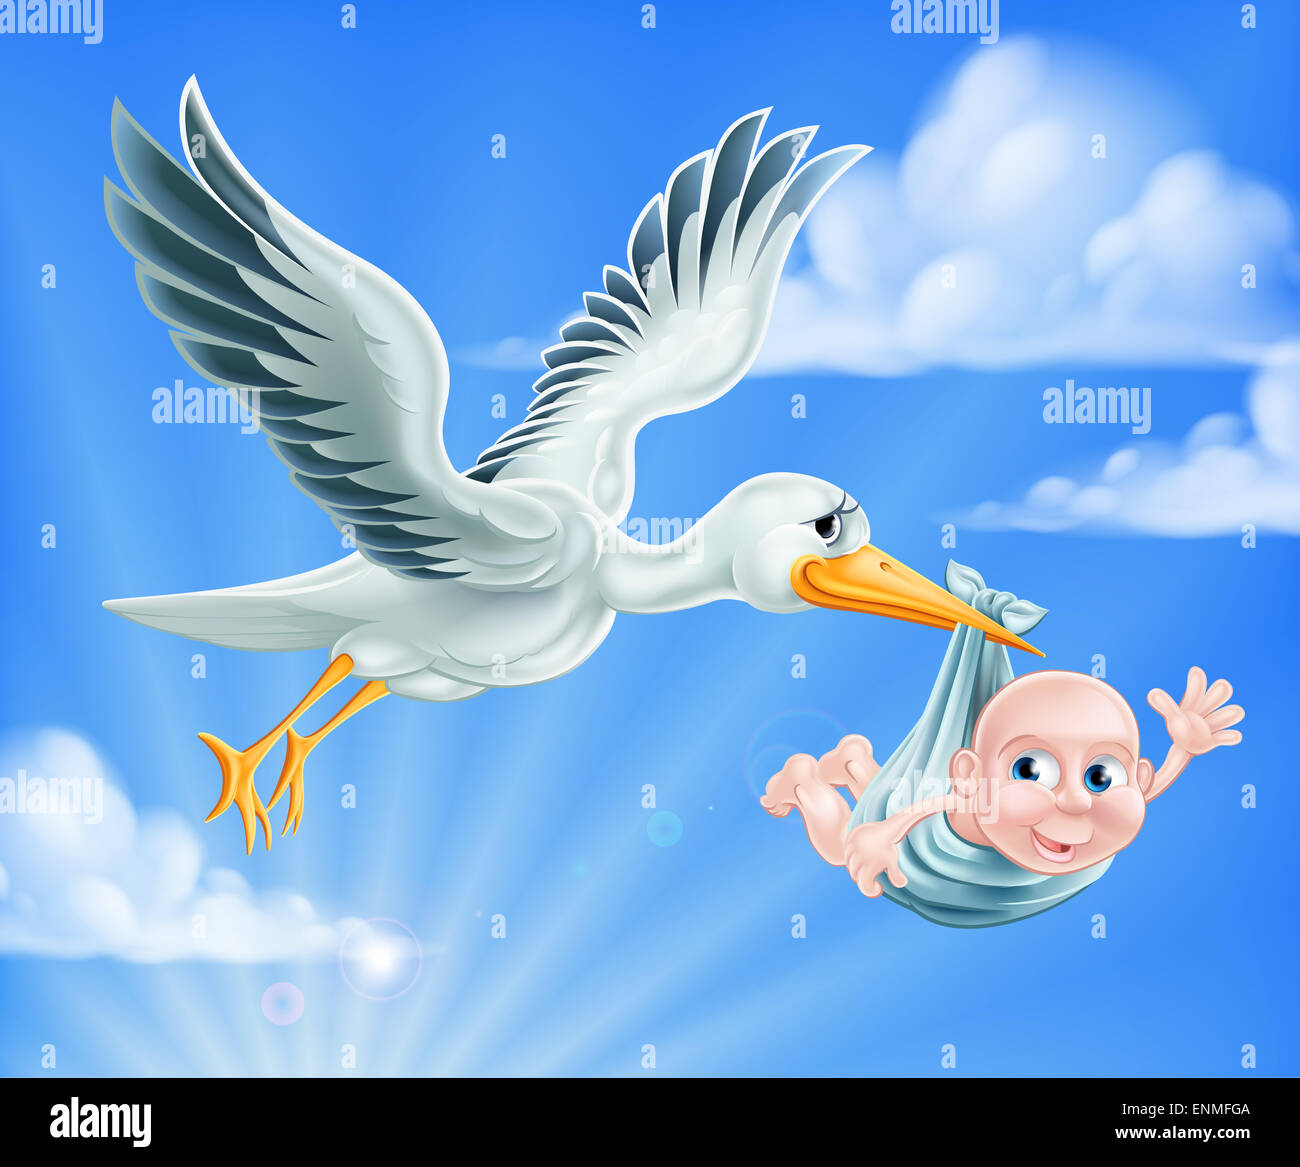 An illustration of a cartoon stork flying through the sky delivering a newborn baby. A classic metaphor for pregnancy or child b Stock Photo